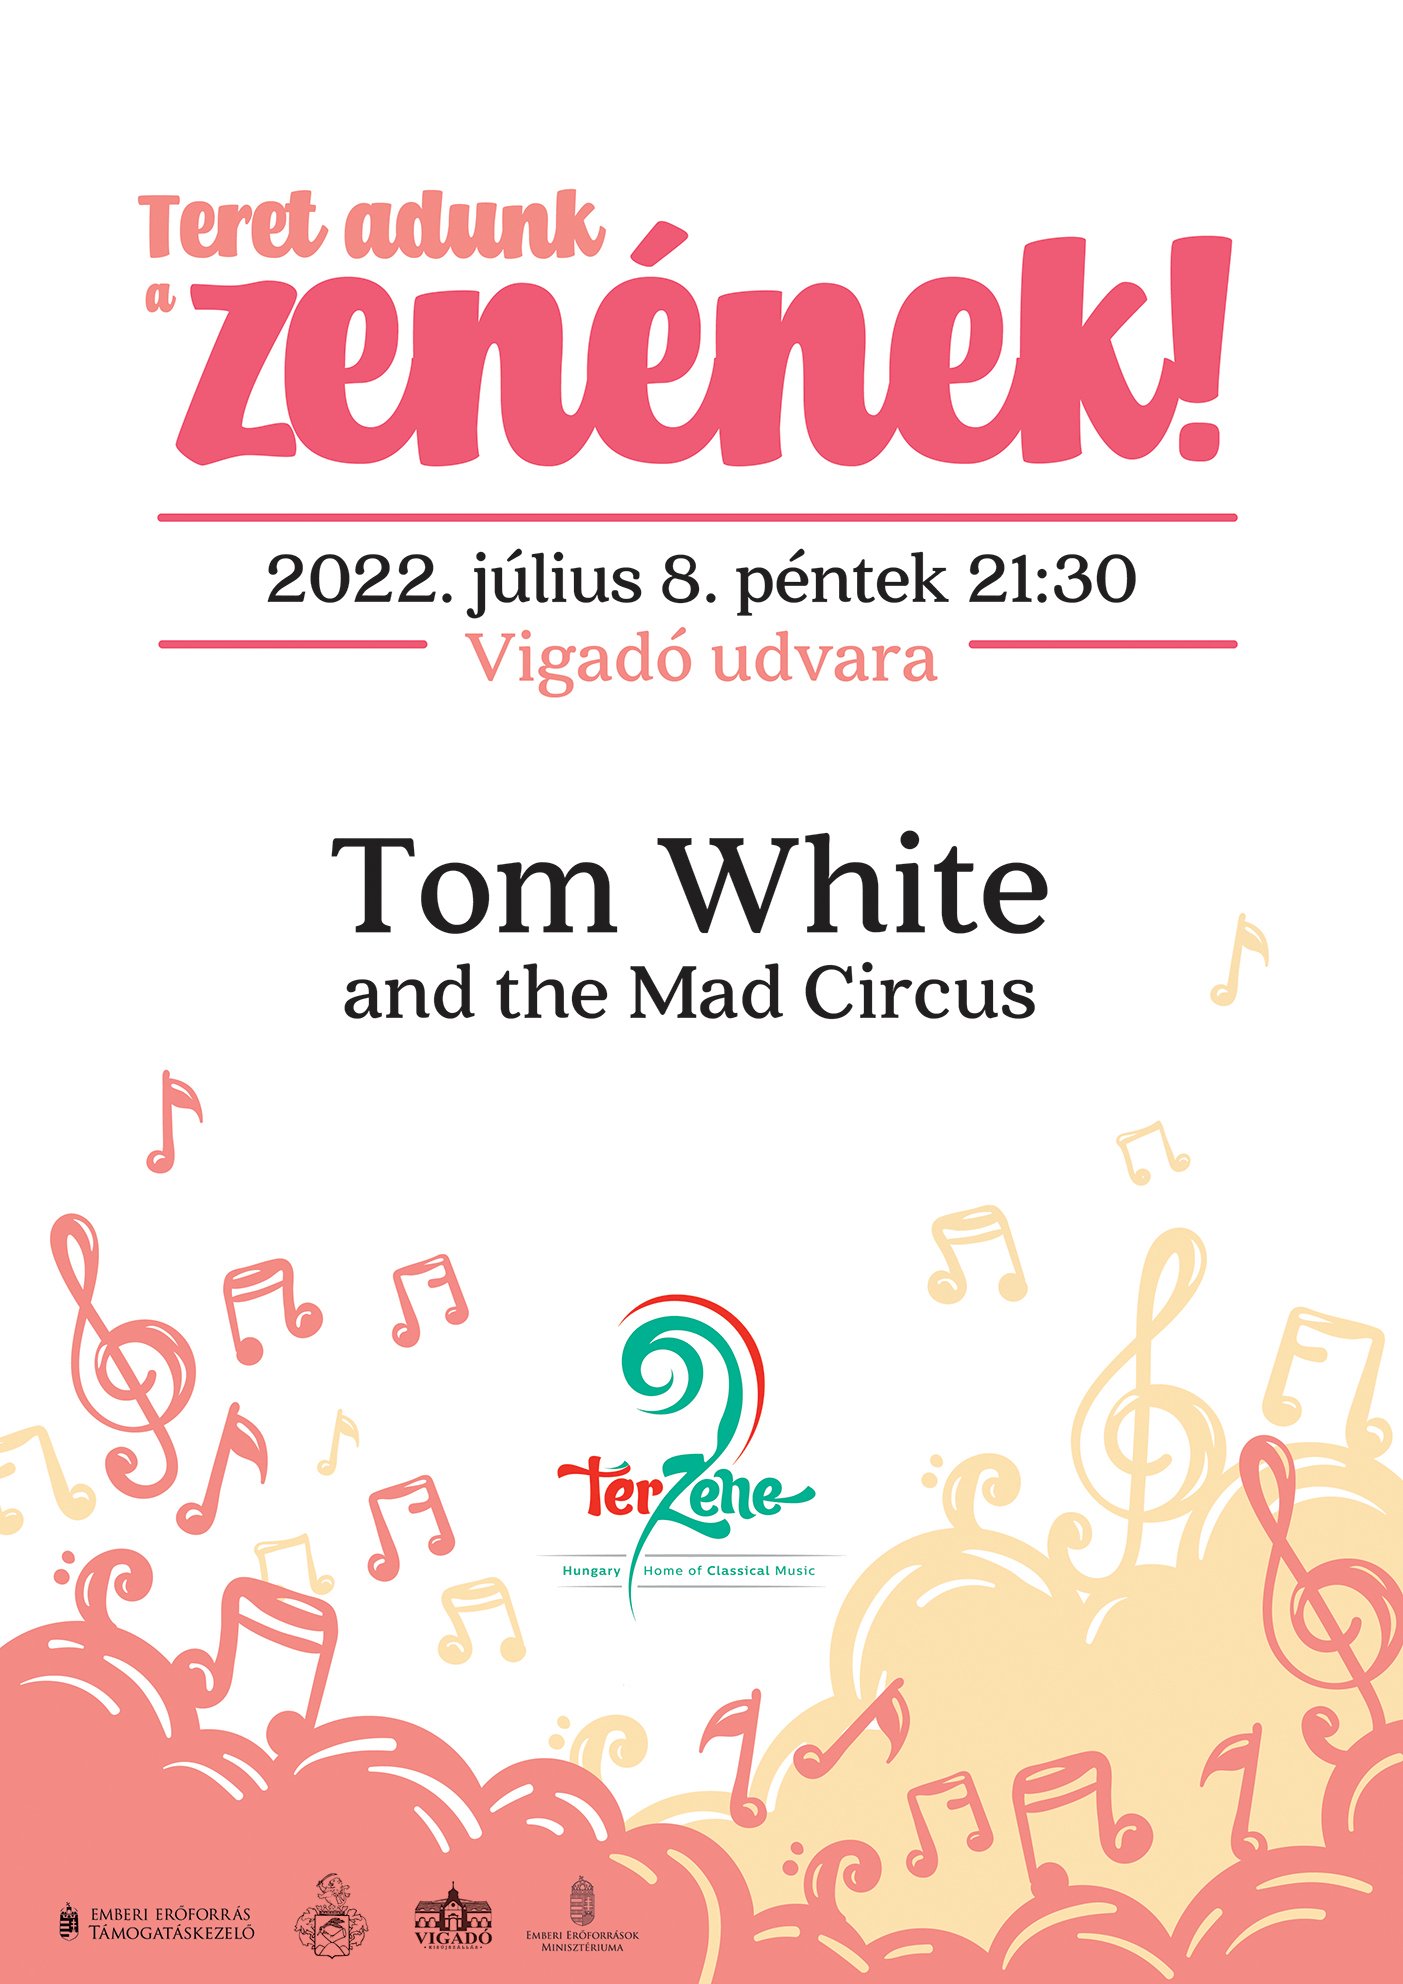 Tom White and the Mad Circus